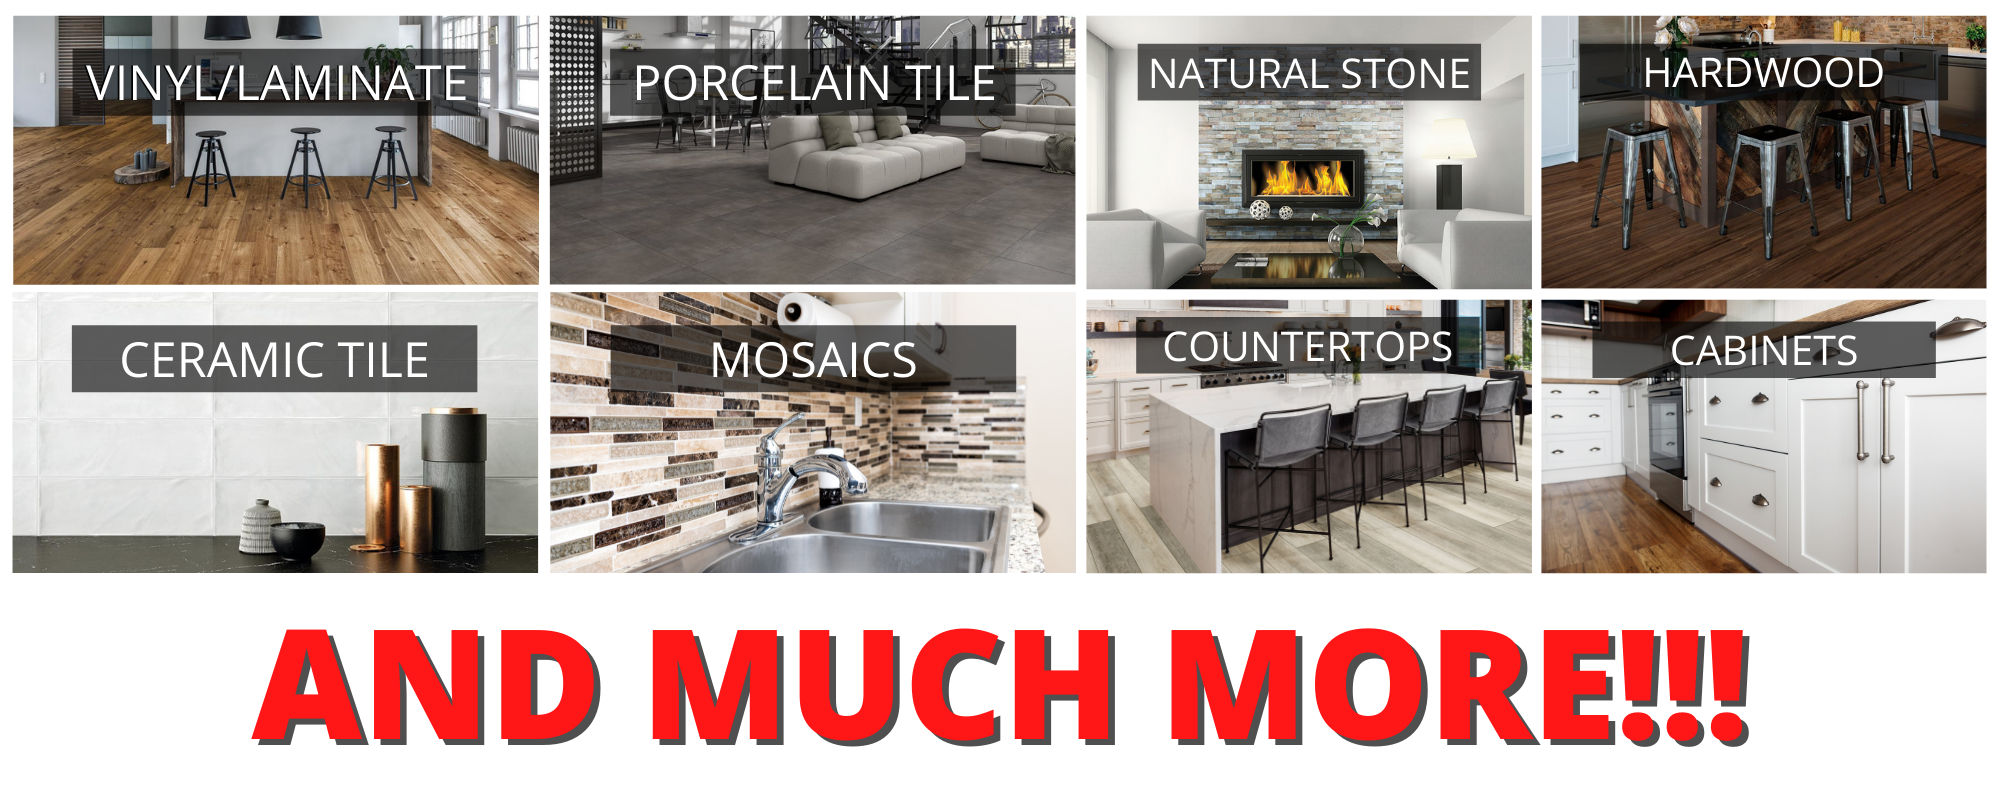 TYPES OF FLOORING & WALL TILE AVAILABLE.-4